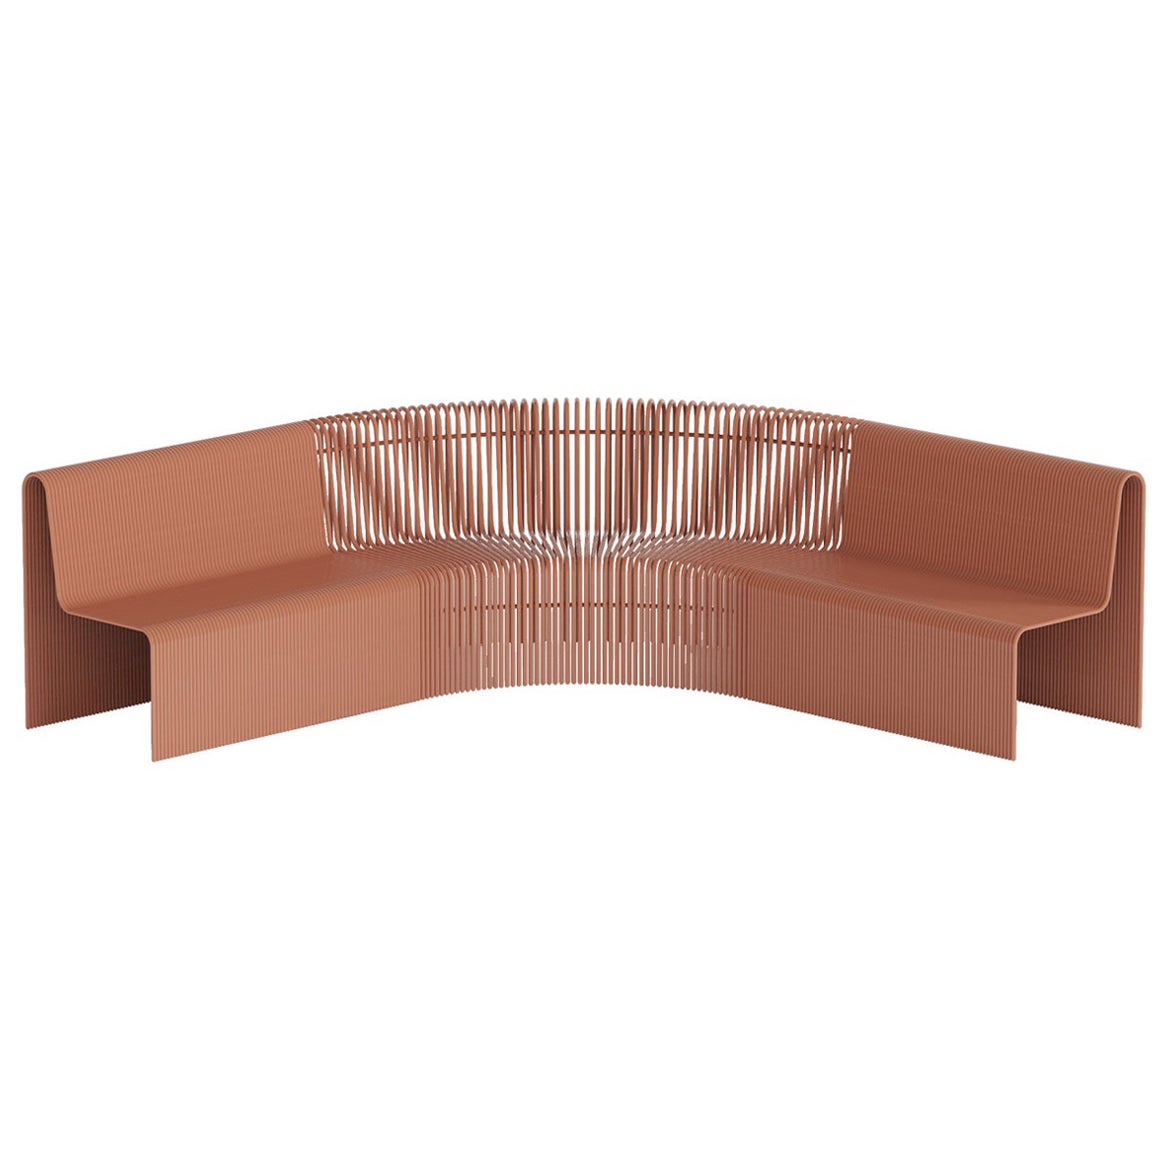 Customizable Powdercoated Aluminum Indoor/Outdoor Curved Sofa by Laun For Sale